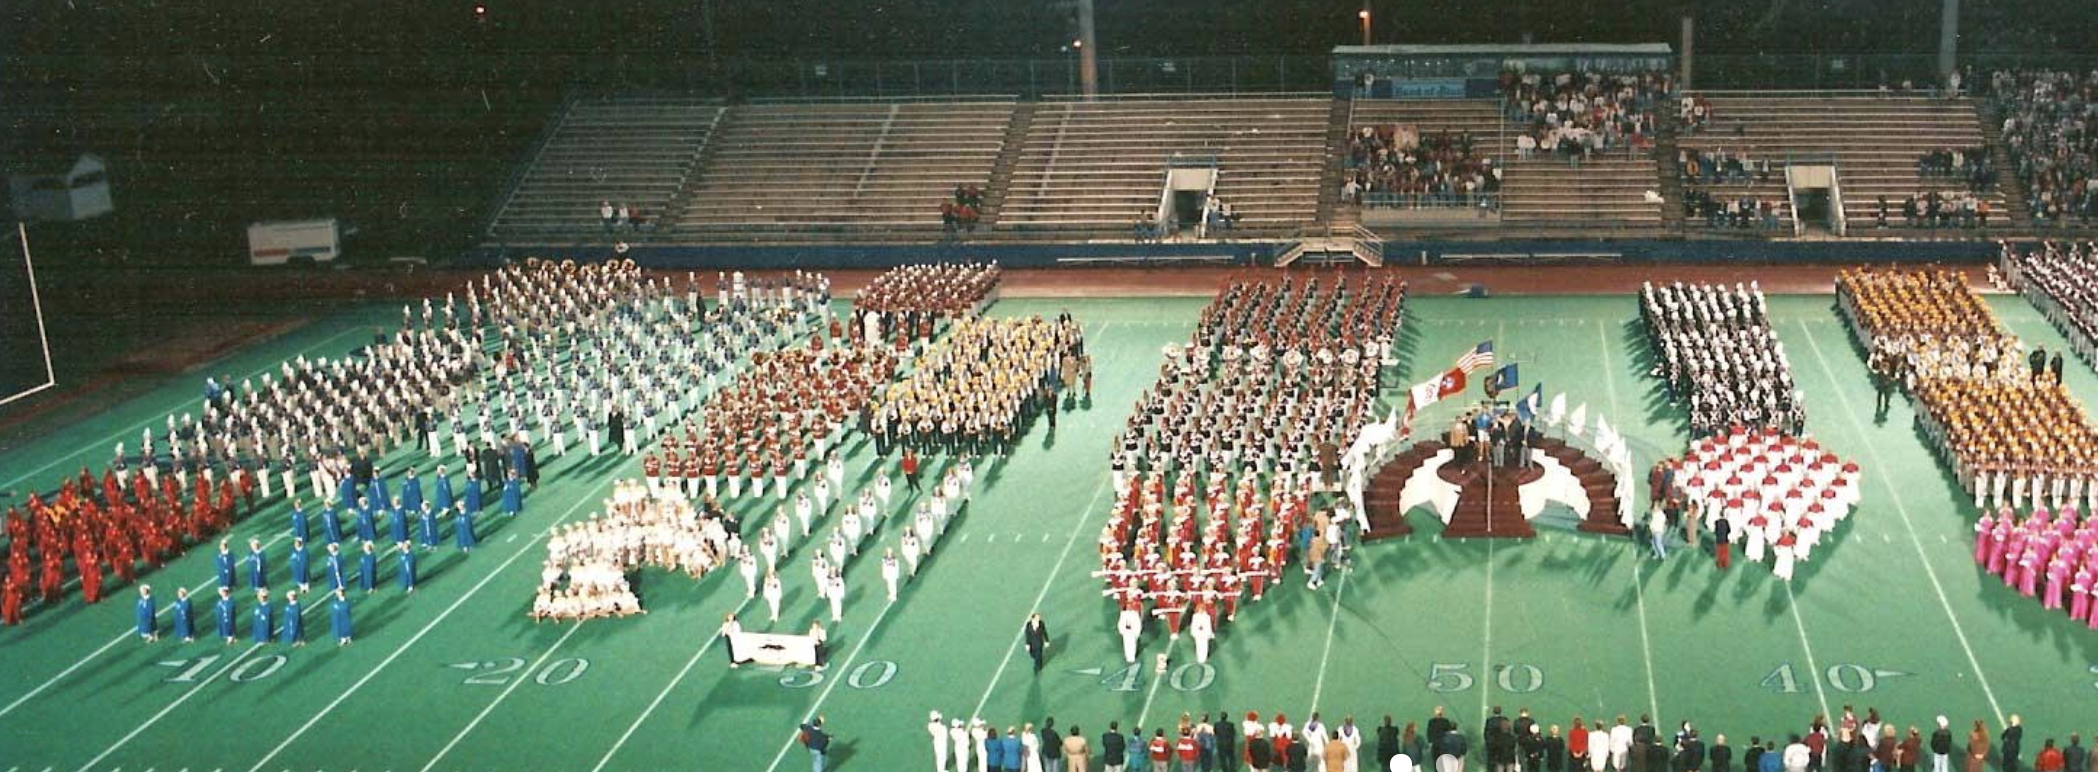 Bands line up for the awards ceremony at a Contest of Champions event years ago. It’s tradition that each group play a small portion of their show prior to leaving the field.